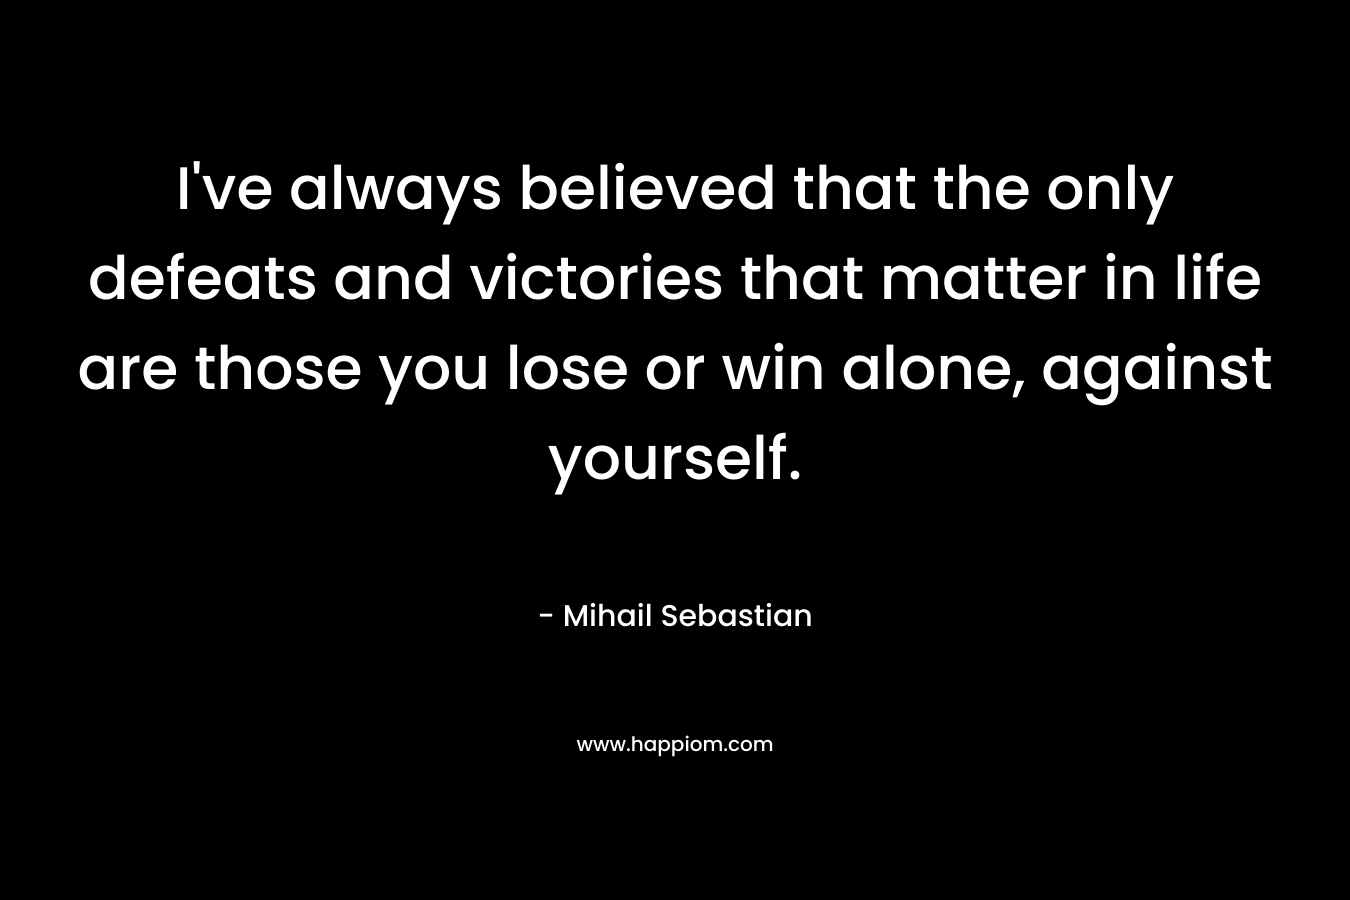 I’ve always believed that the only defeats and victories that matter in life are those you lose or win alone, against yourself. – Mihail Sebastian